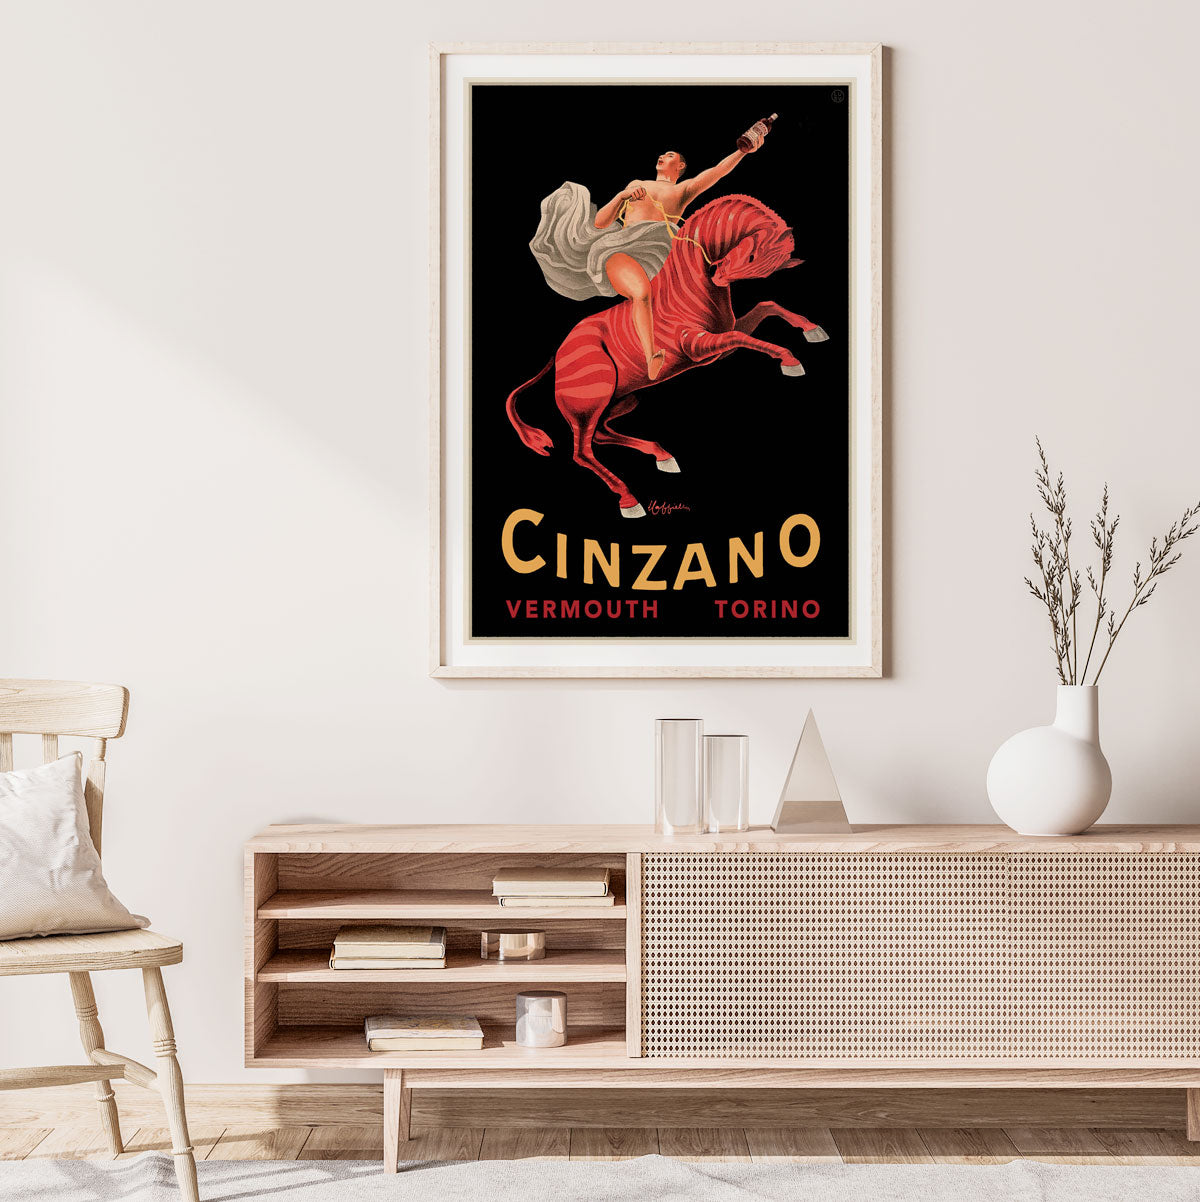 Cinzano Vermouth vintage advertising poster or framed print from Places We Luv